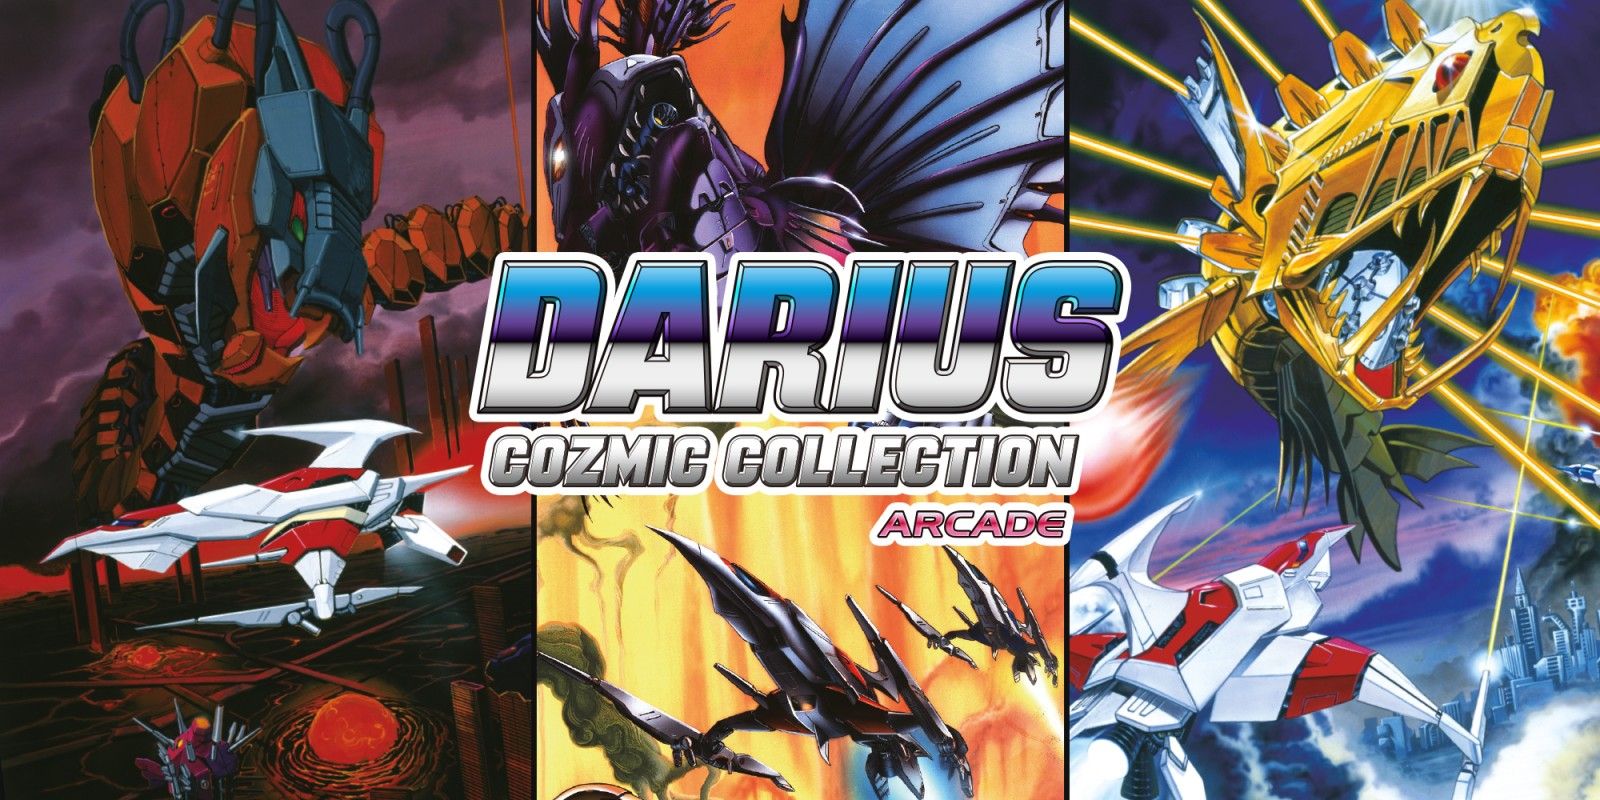 Darius Cozmic Collection Arcade Art showing a split image of the Silver Hawk fighting